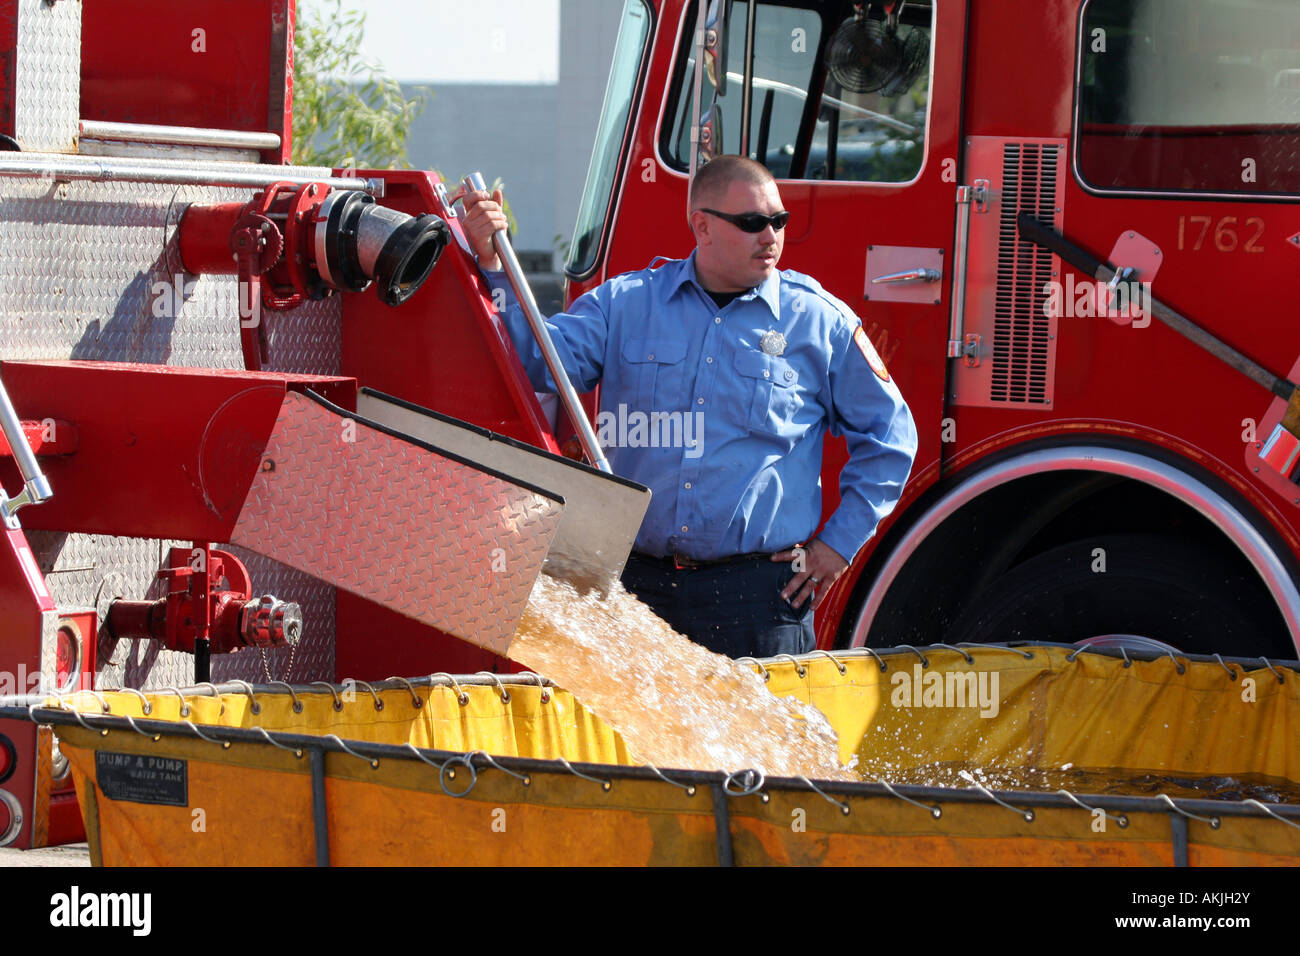 A firefighter standing at the unloading or dumping of water from a tranker fire truck into a dump and pump station Stock Photo